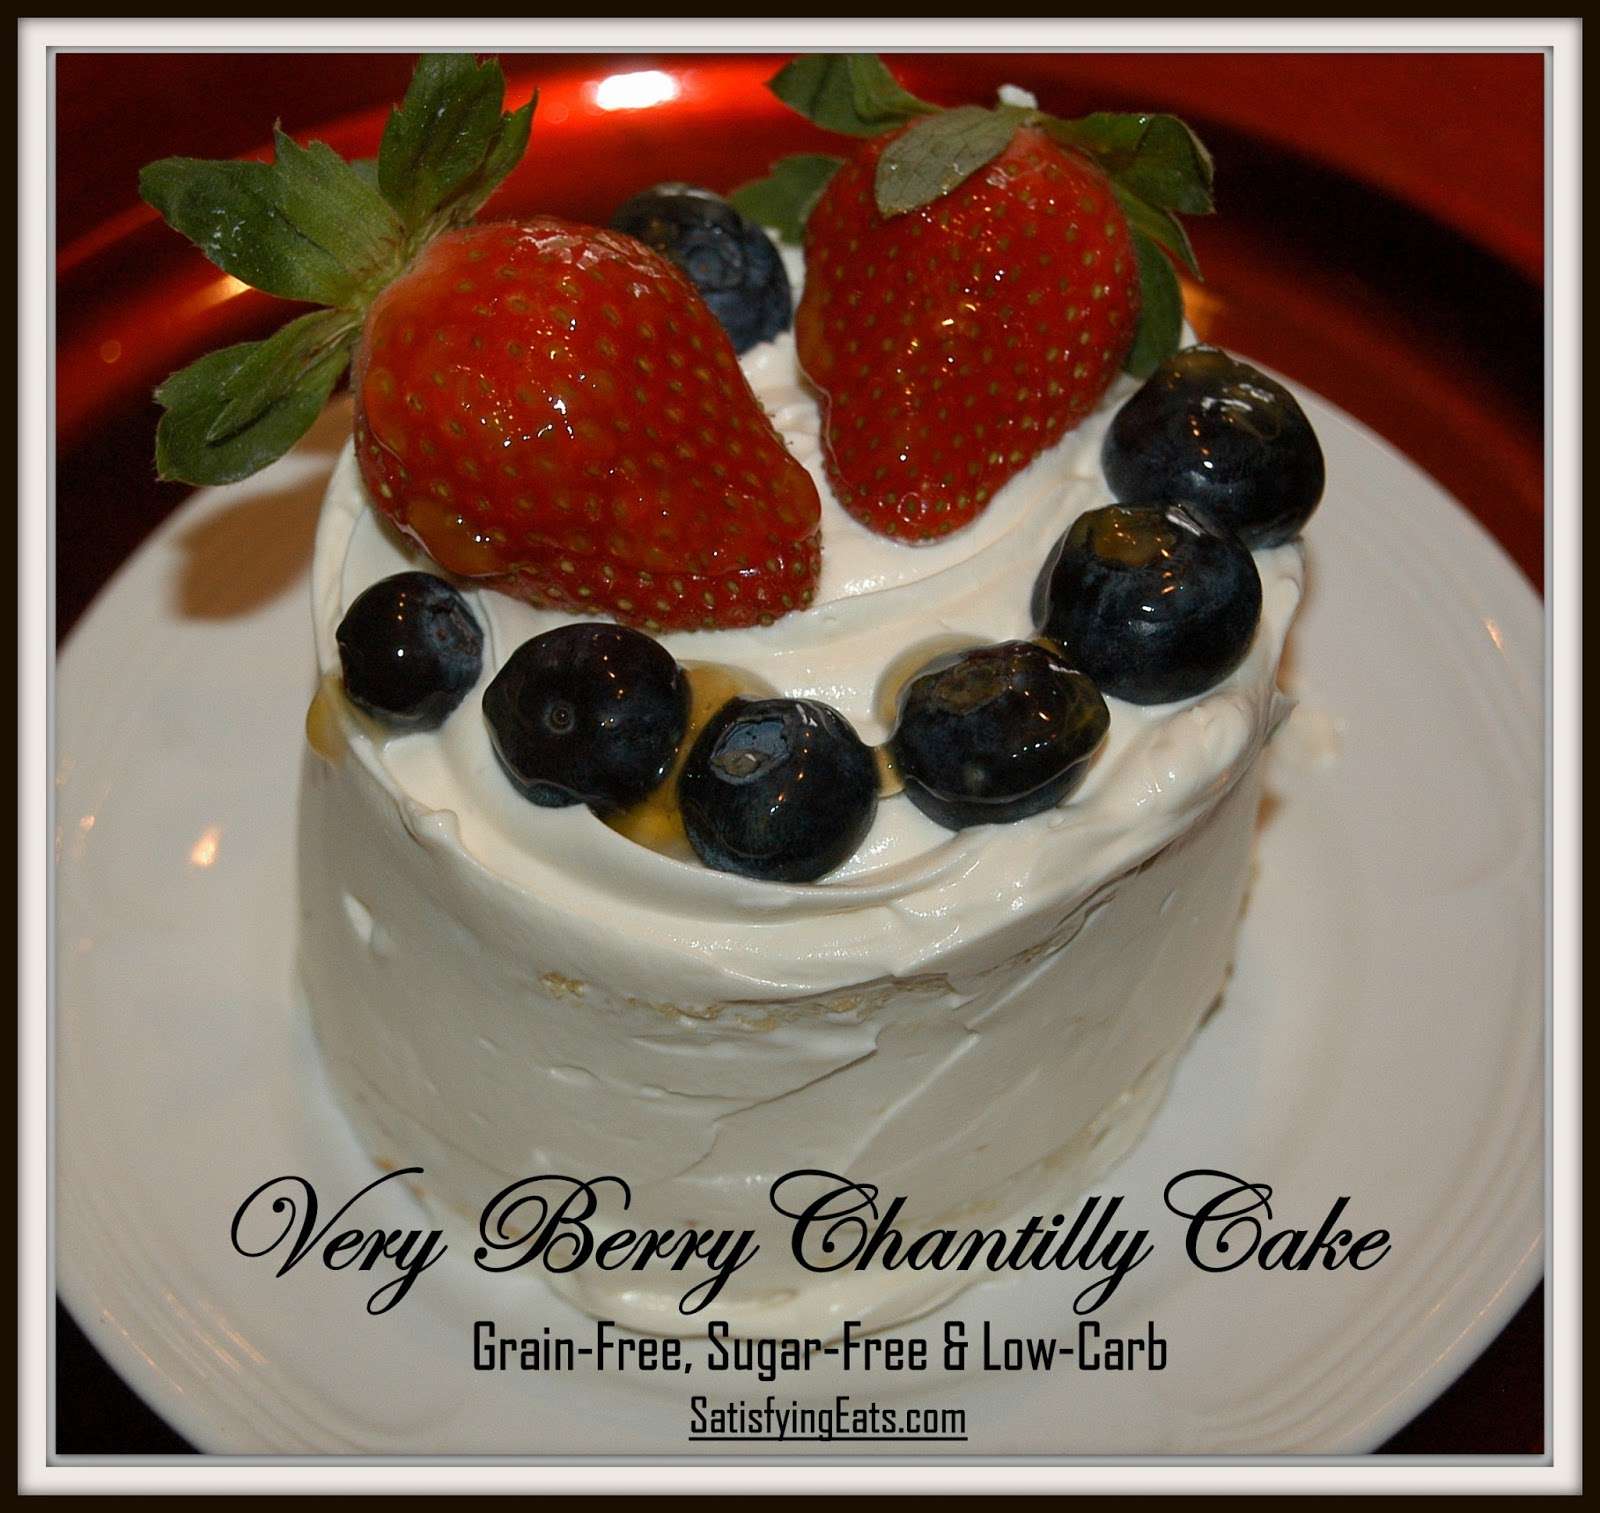 Satisfying Eats: Very Berry Chantilly Cake (Adult Birthday Cake)